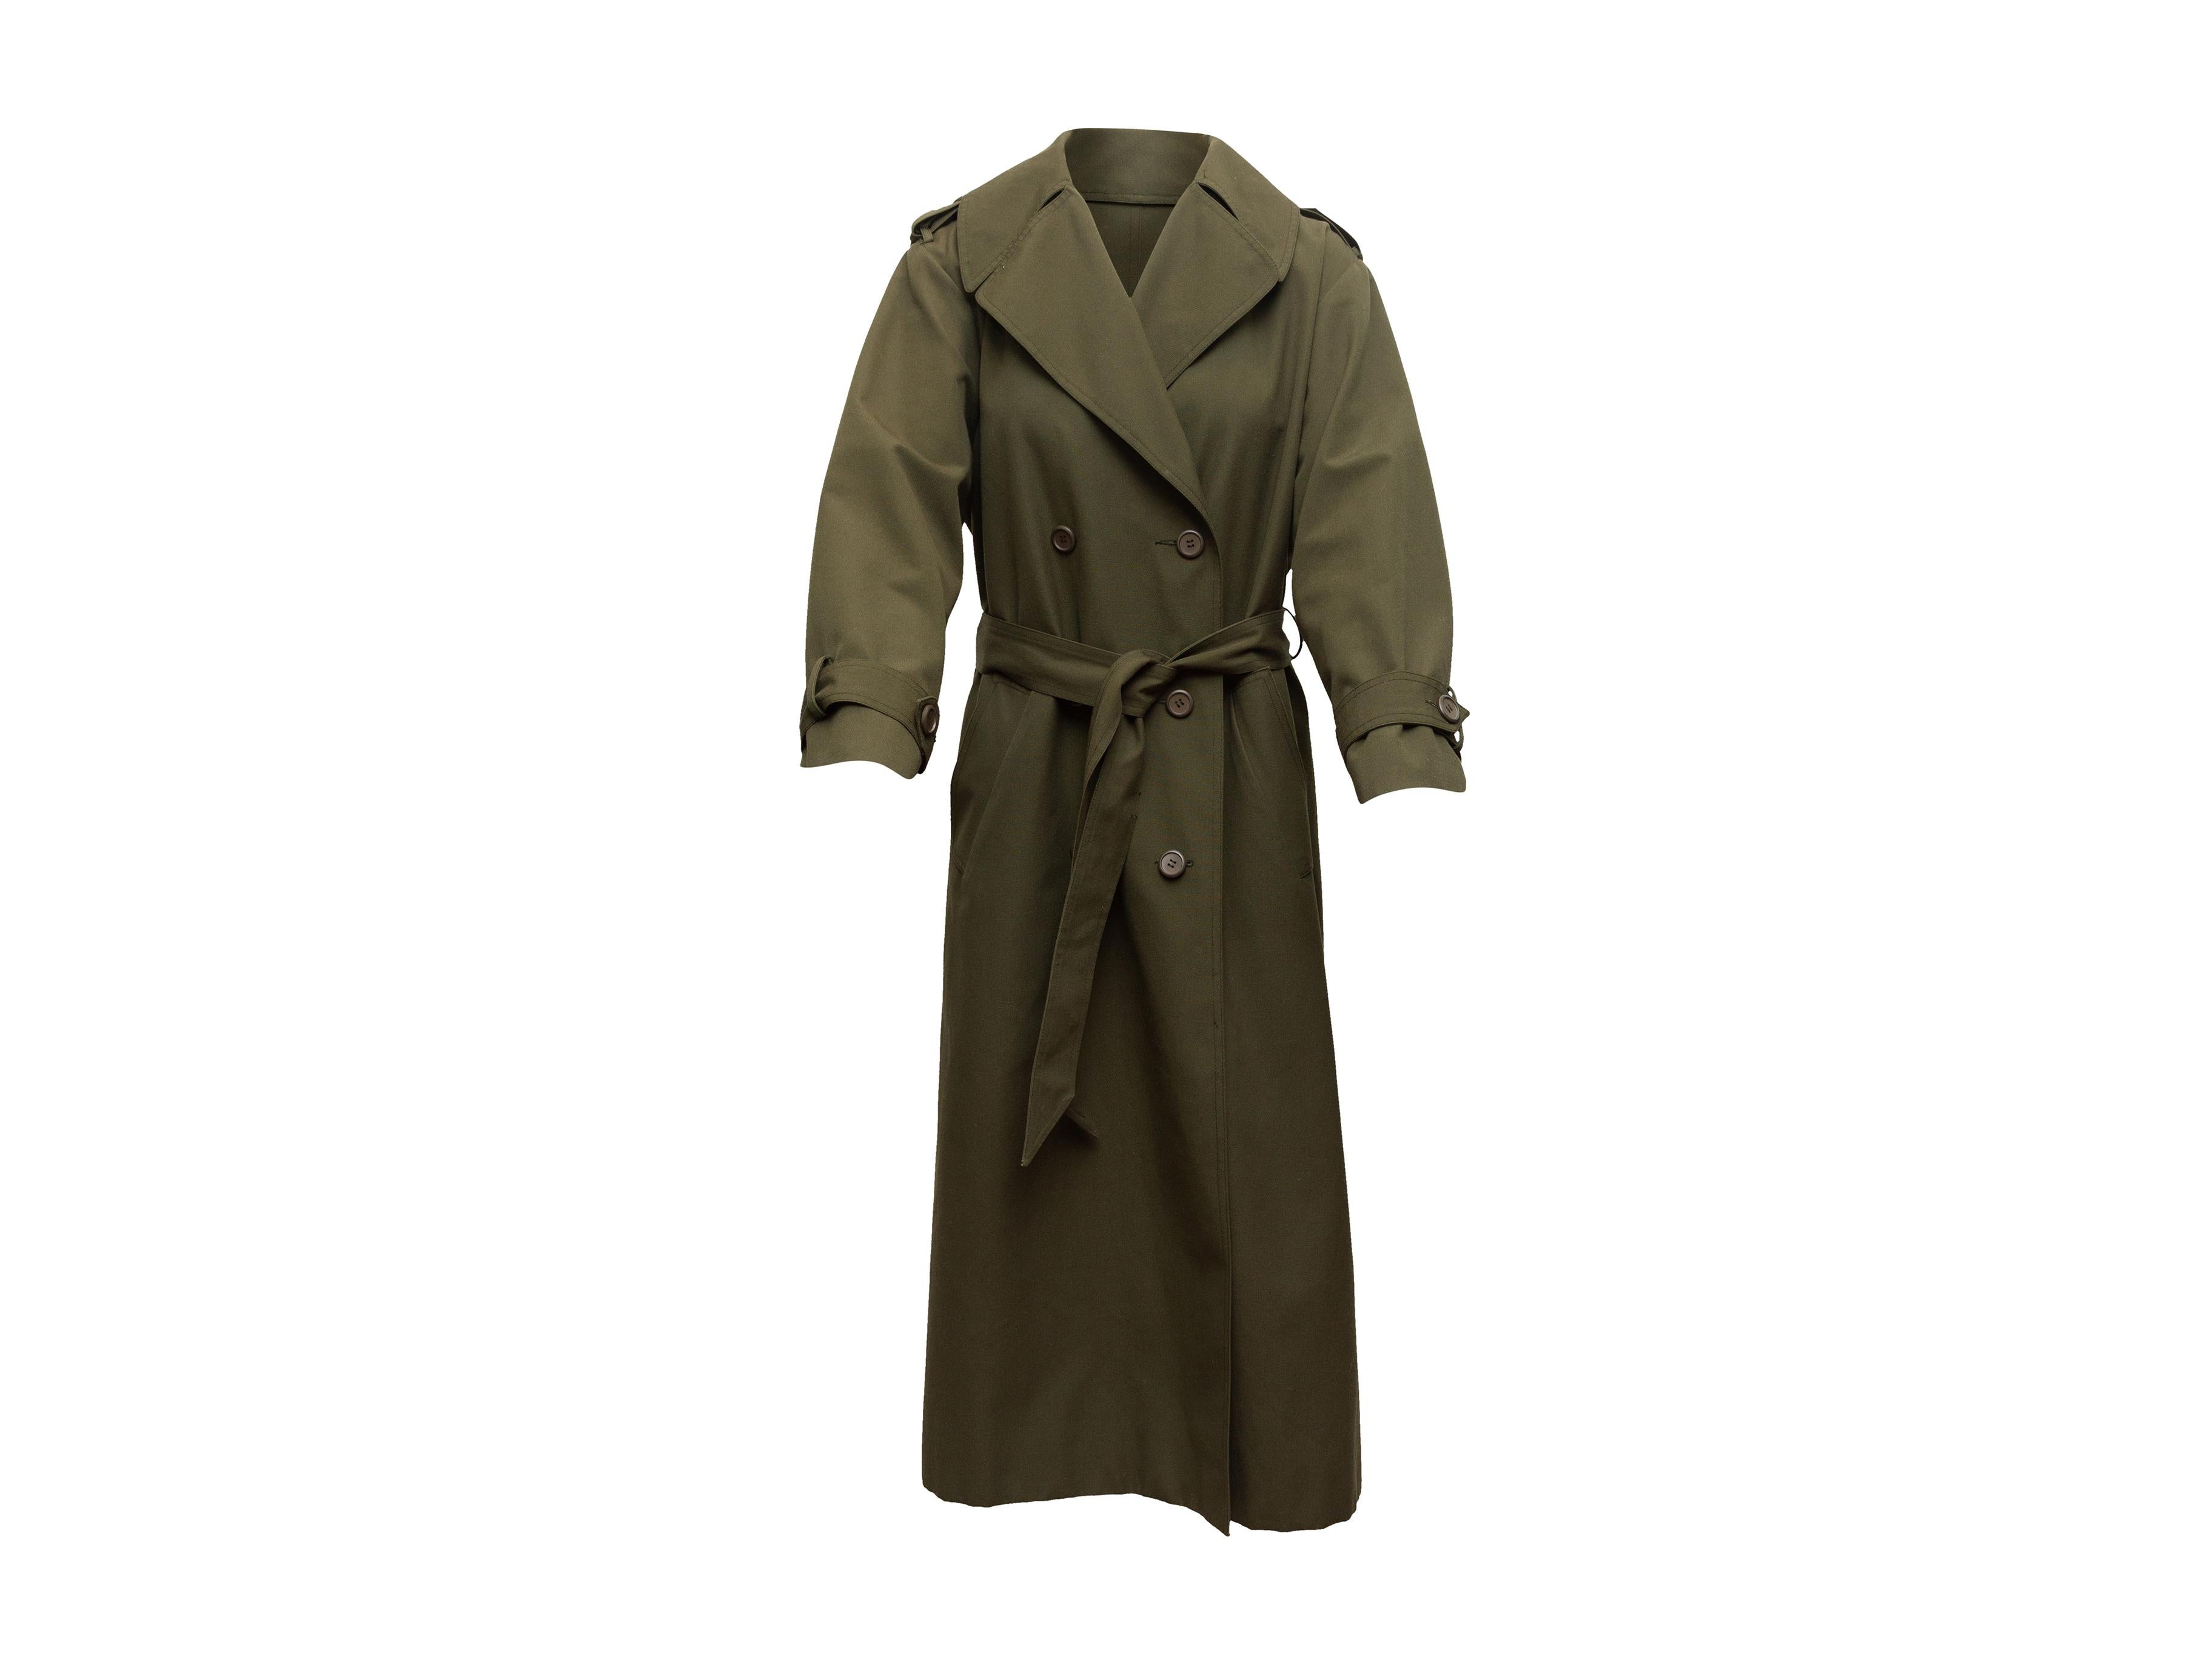 Product details: Vintage olive long double-breasted trench coat by Christian Dior. Notched lapel. Dual hip pockets. Sash tie at waist. Button closures at front. 40